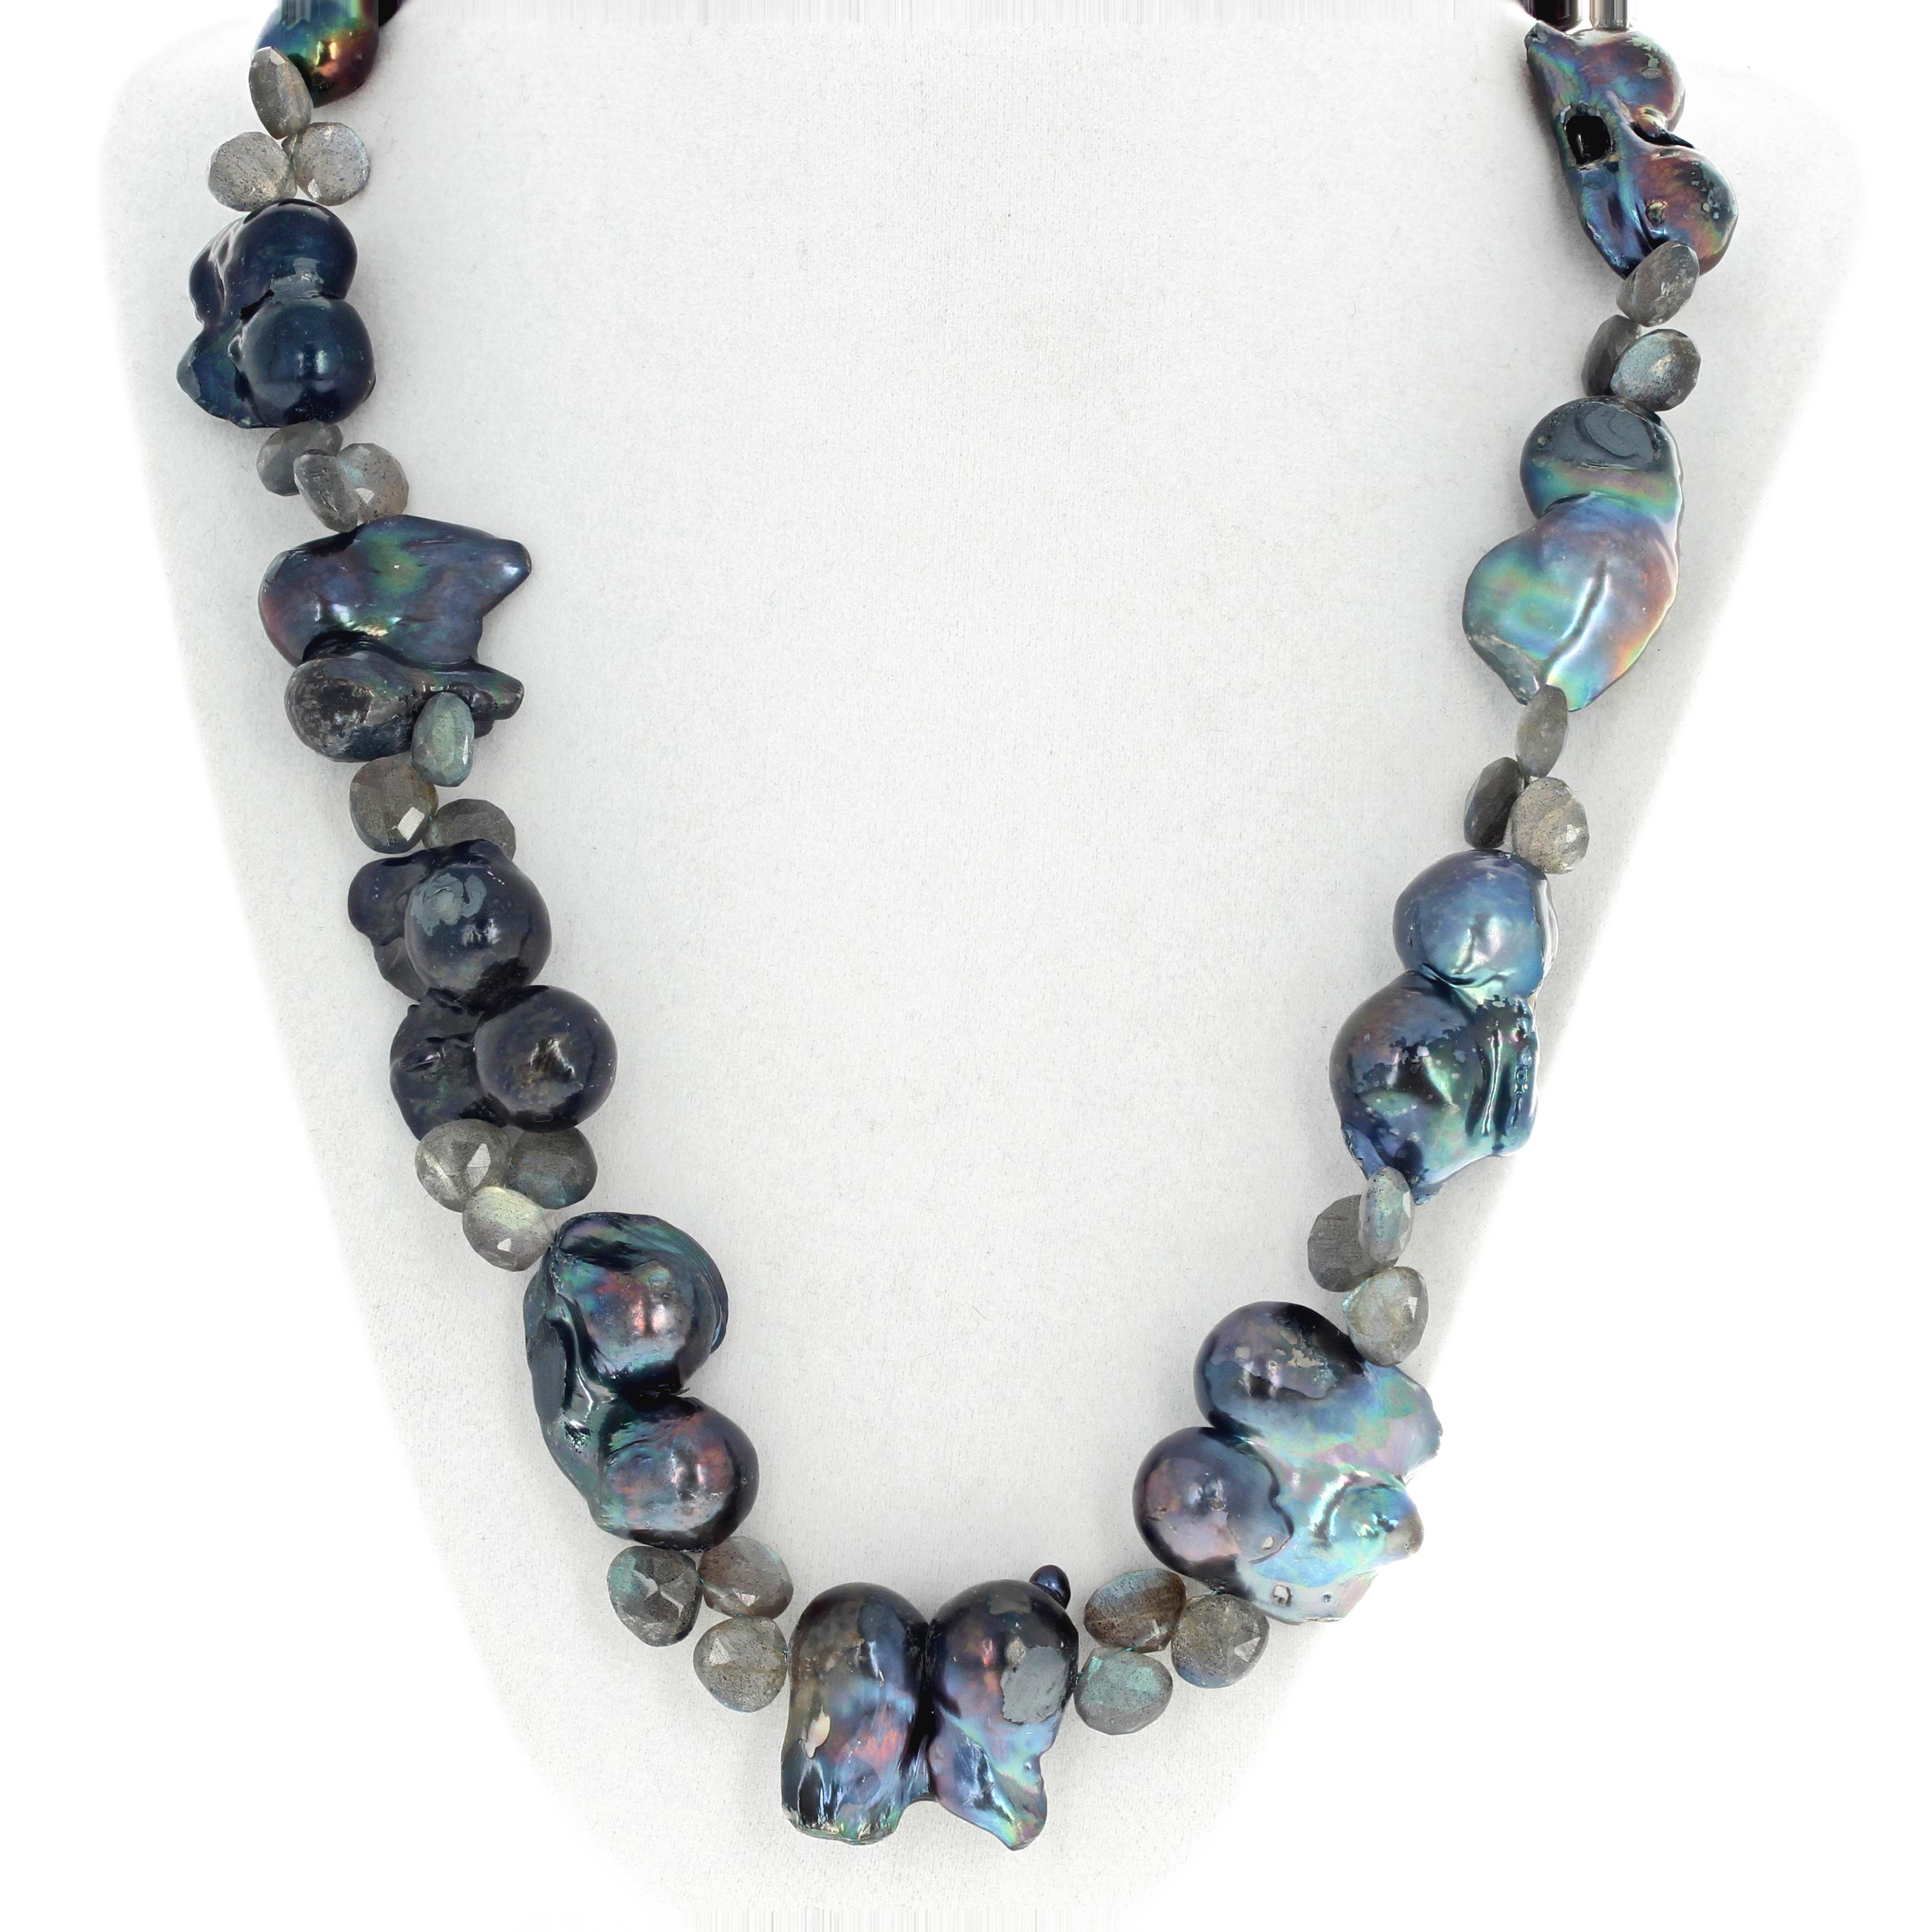  Splendid Unique cultured freshwater Peacock Pearls enhanced with glittering gem cut leaves of natural Labradorite set in a handmade necklace with a sterling silver clasp.  The necklace is 
23 inches long.  More from this seller by putting gemjunky